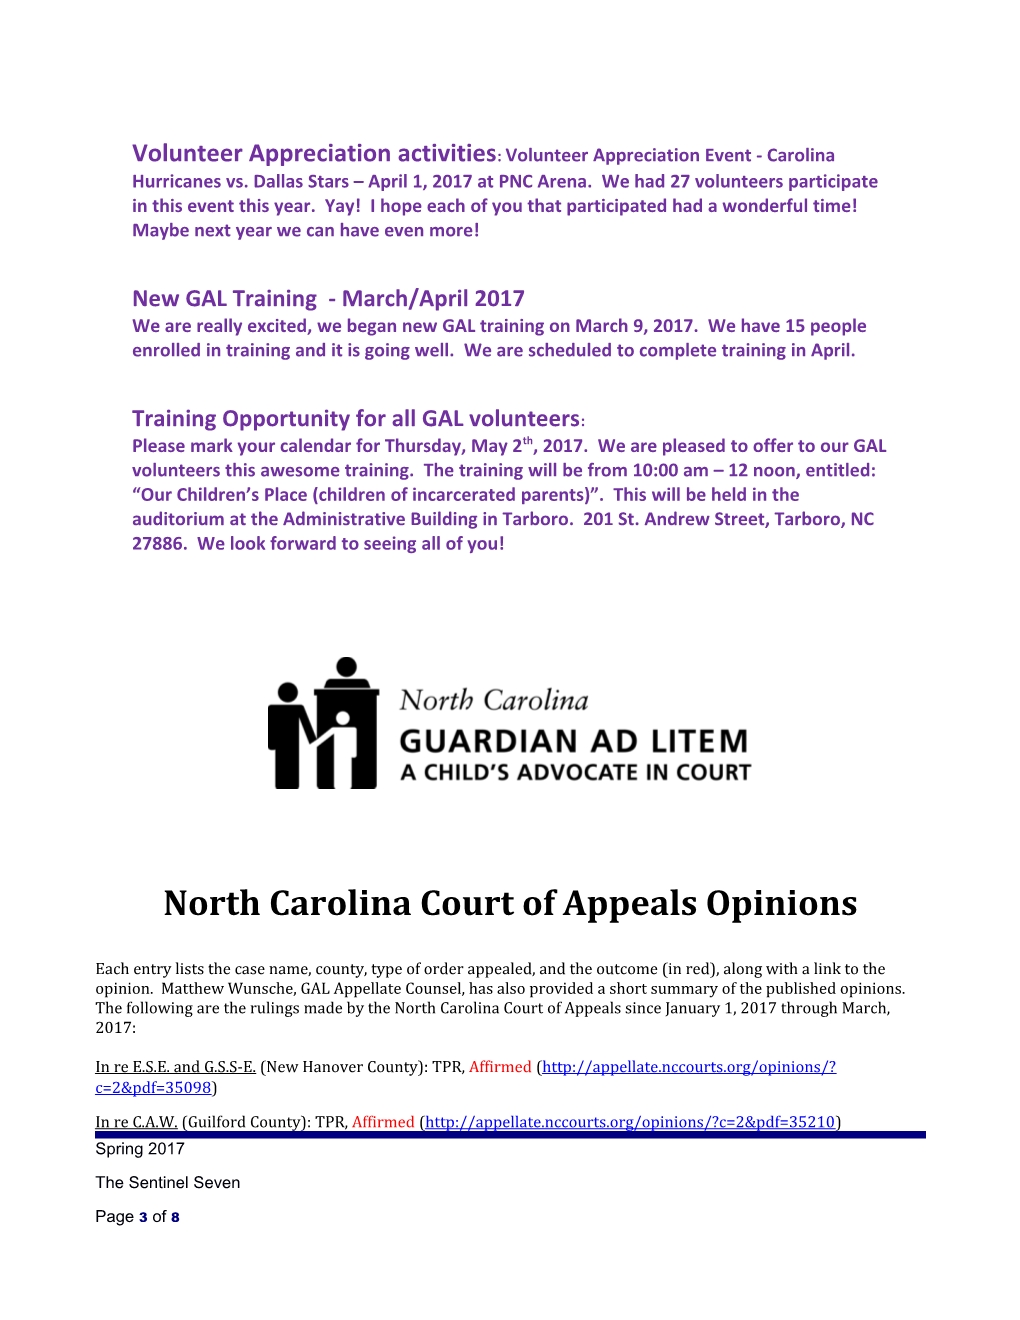 North Carolina Court of Appeals Opinions